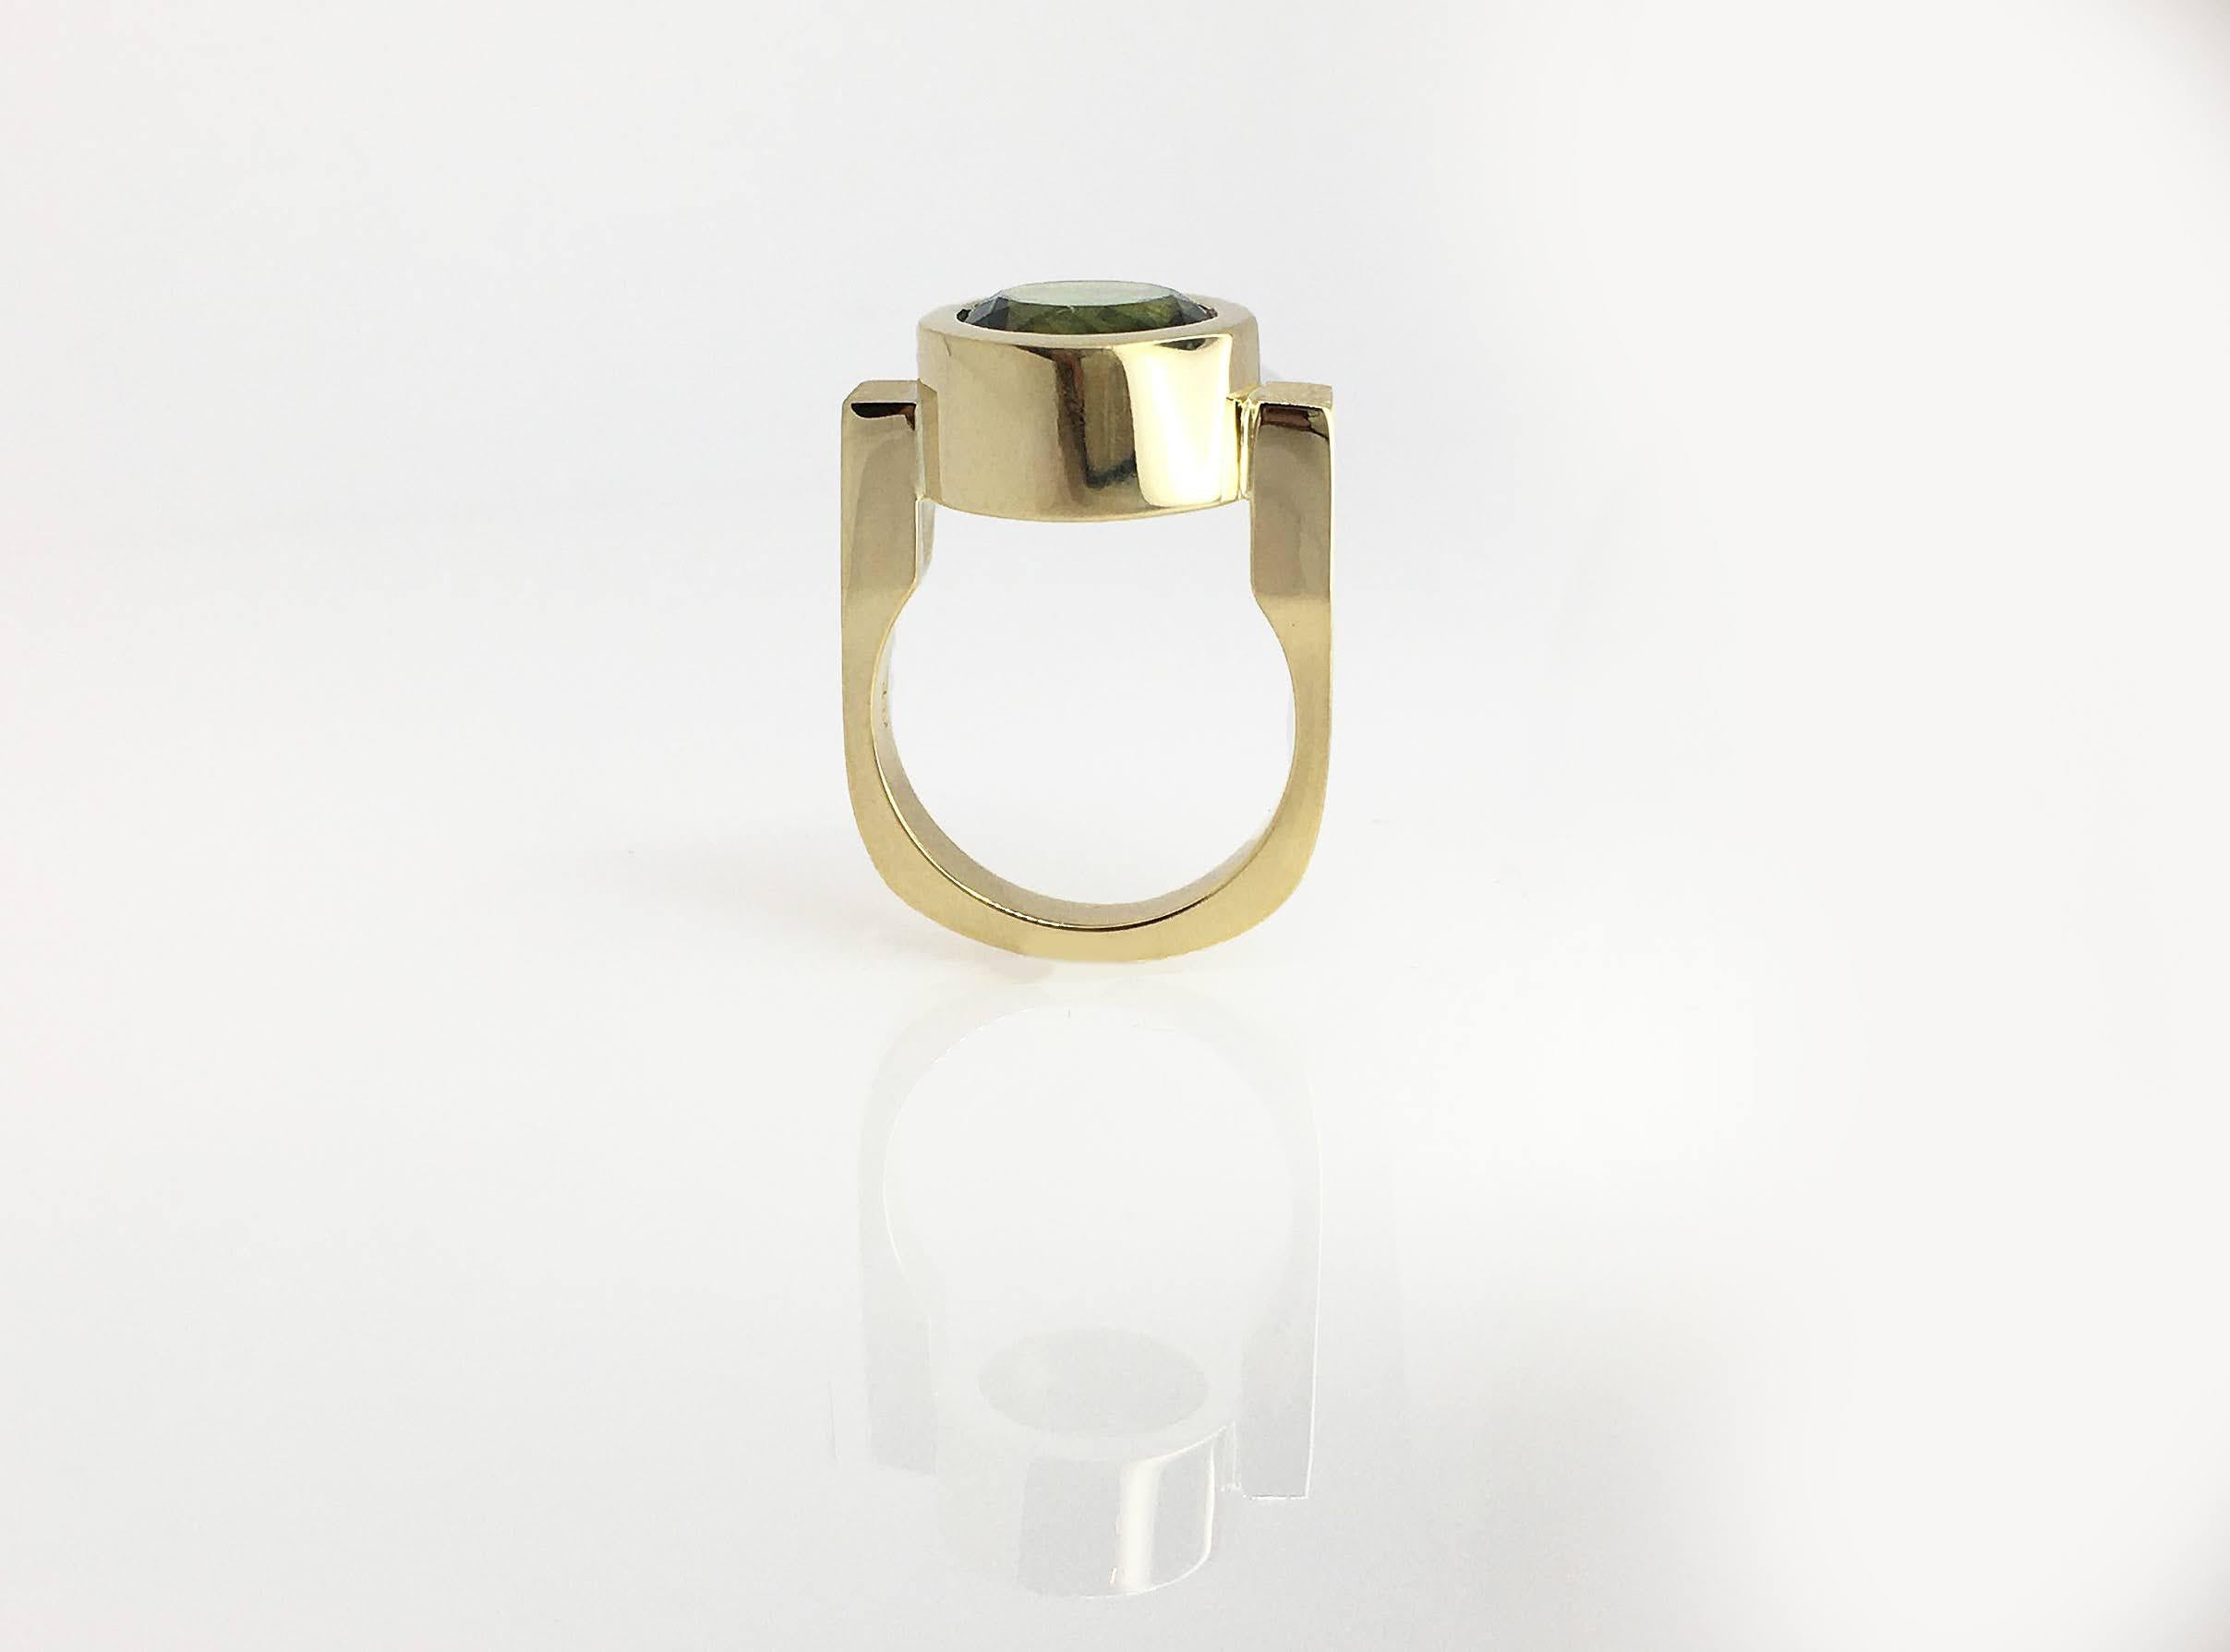 This Green Tourmaline Bezel Ring is shown here in yellow gold. A round bezel set on a squared band with a high polish finish creates an infinitely modern look. Be careful, this ring will bring you much attention, if that’s what you’re aiming for,